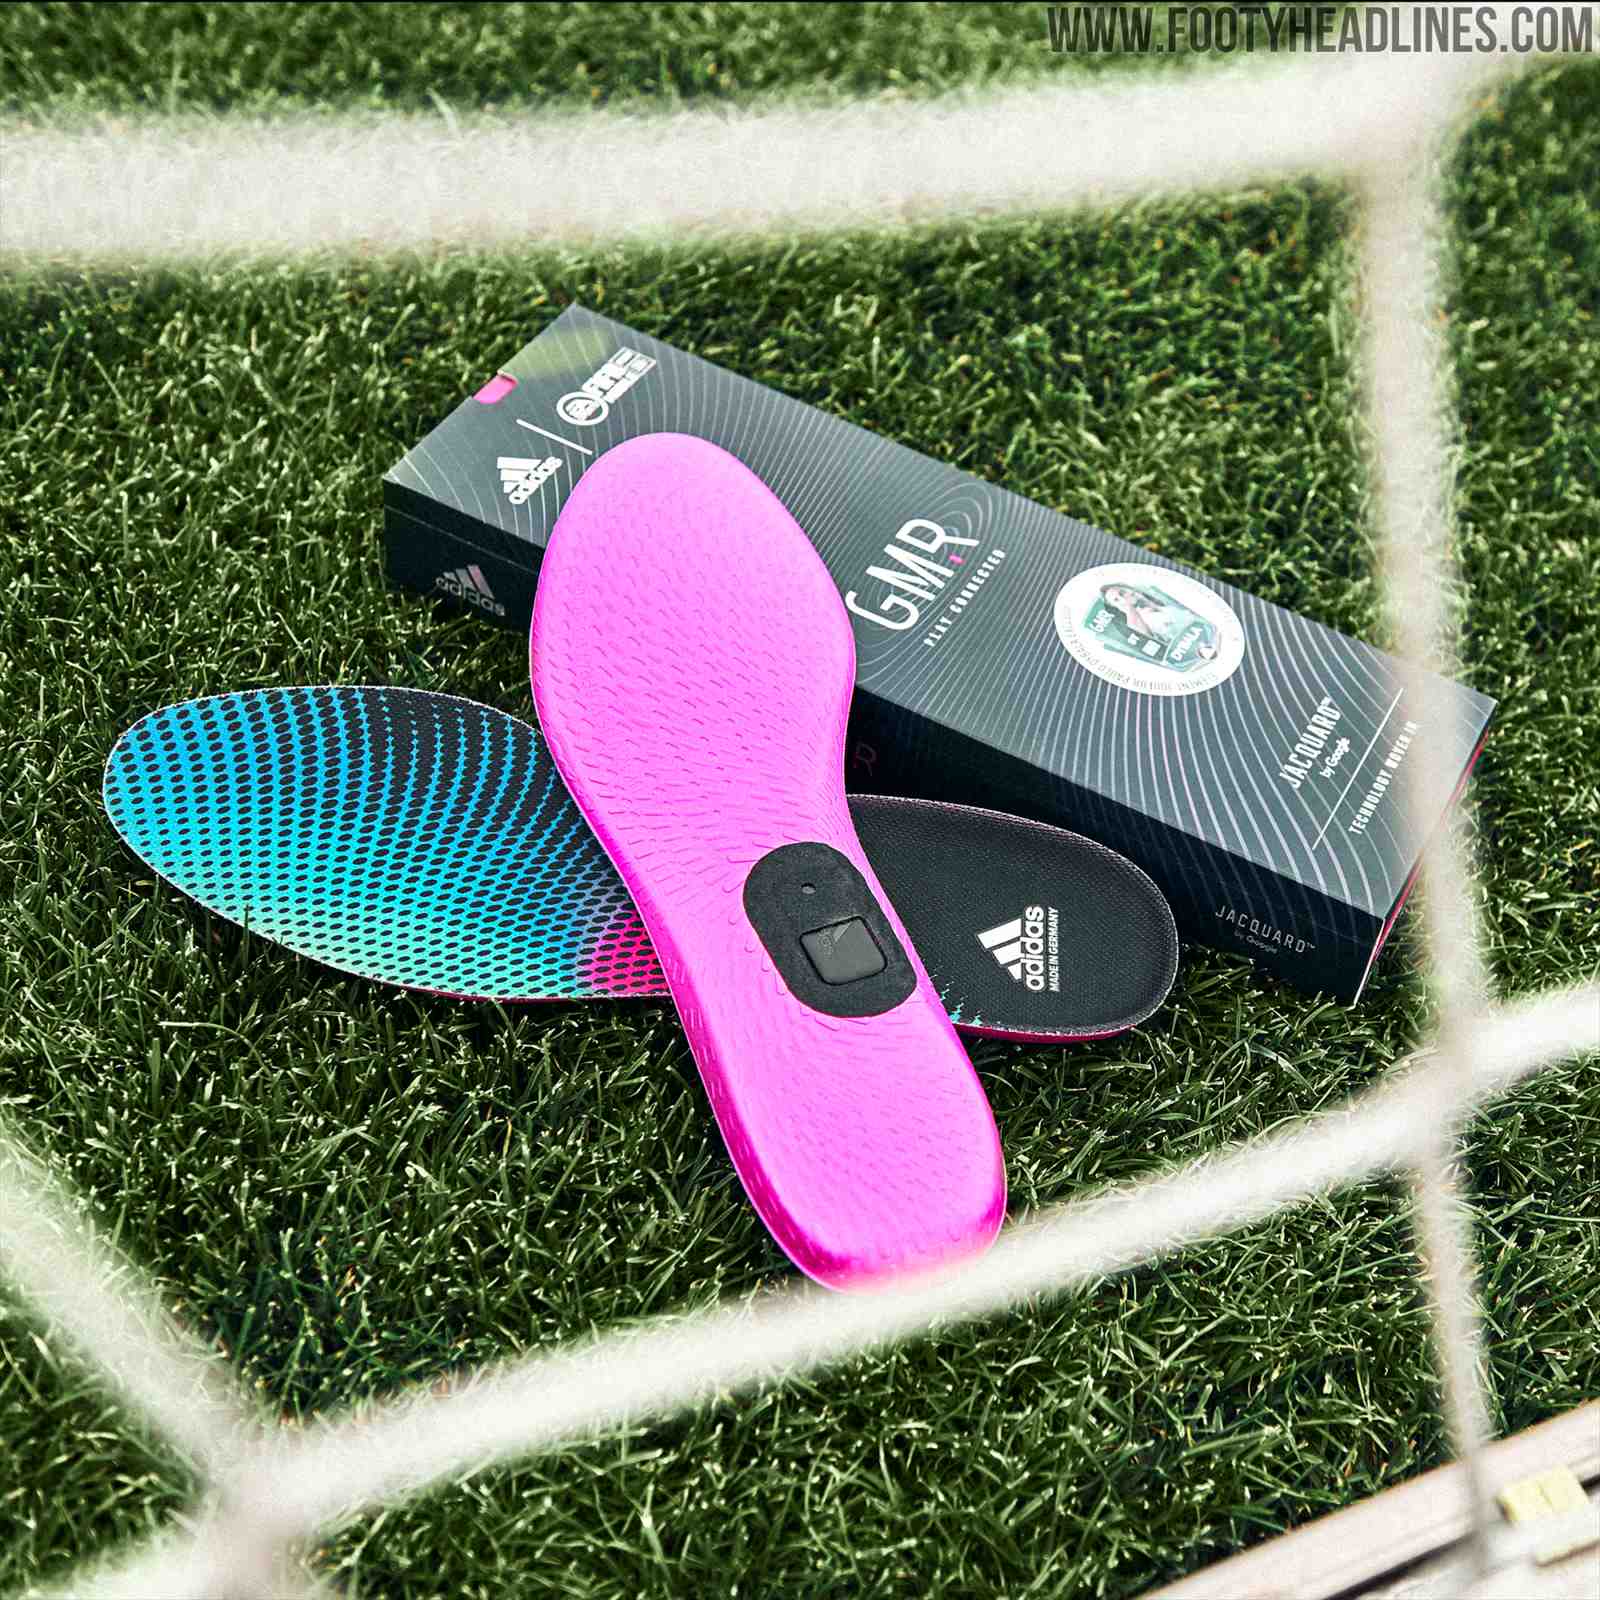 Revolutionary? Adidas GMR Tracking Insoles Launched - Footy Headlines